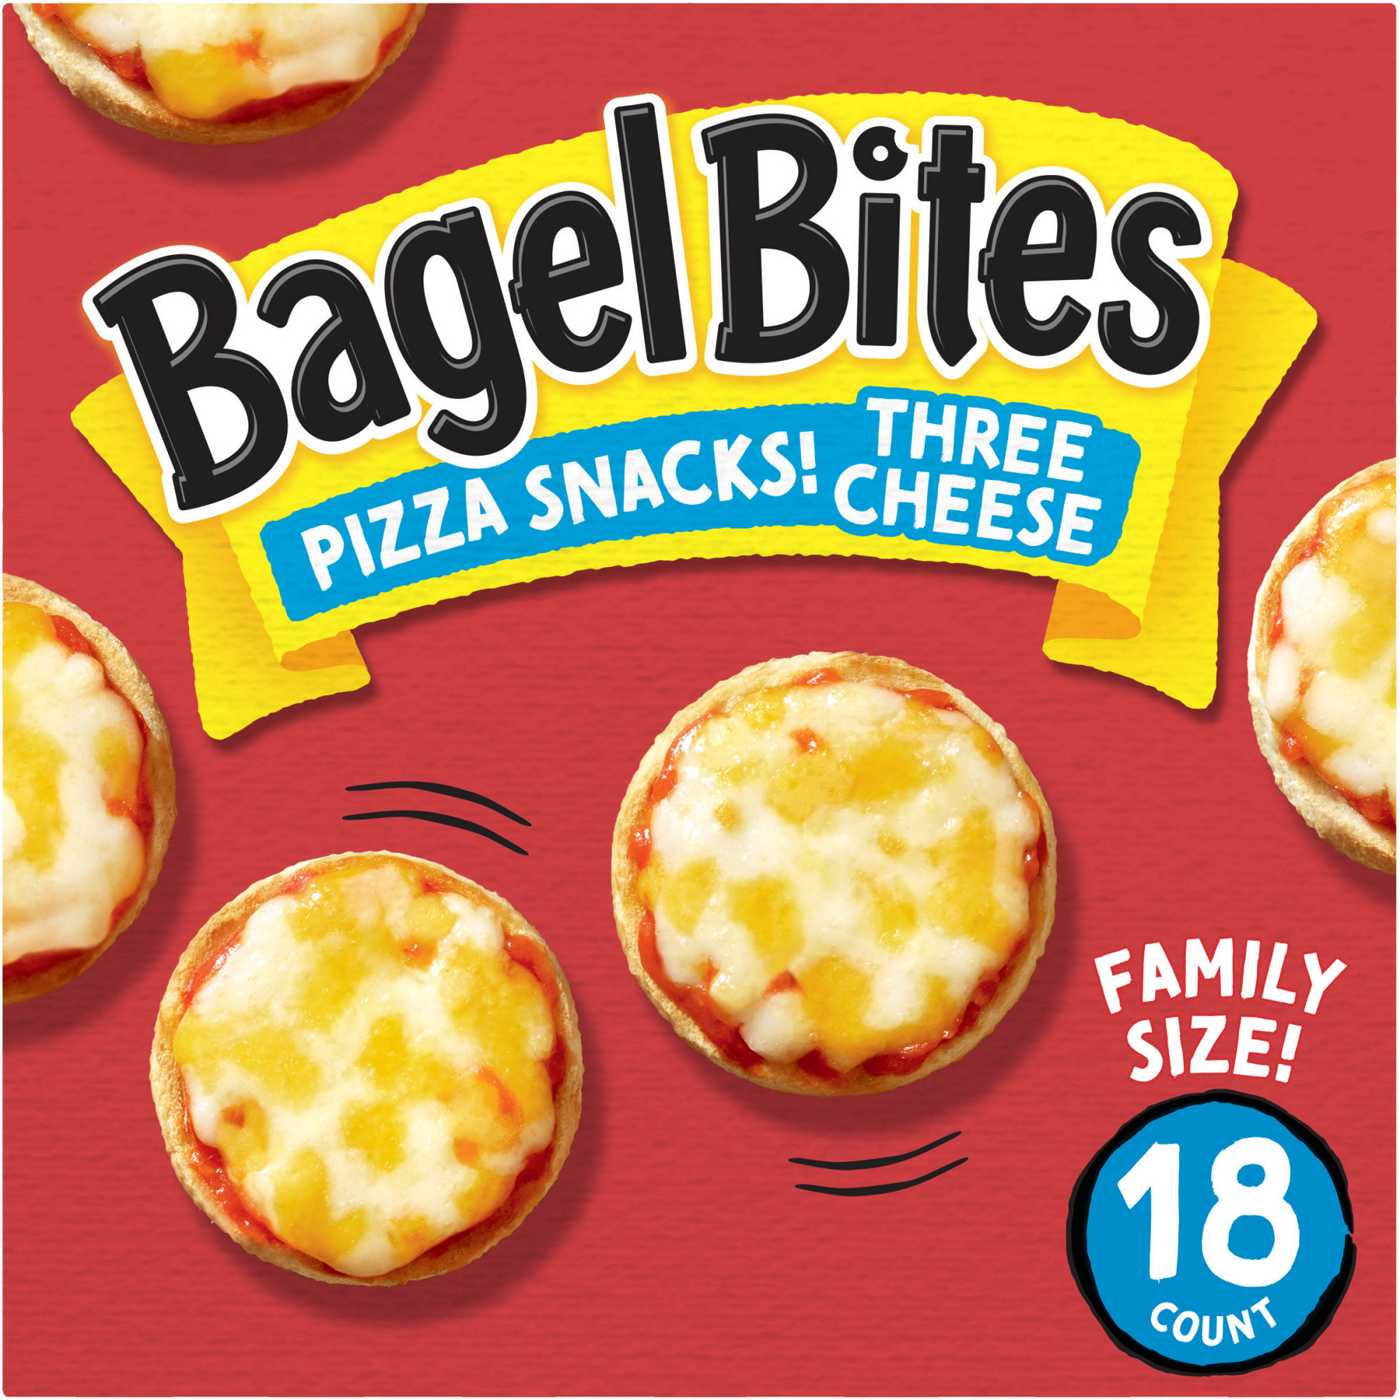 Bagel Bites Frozen Three Cheese Pizza Snacks - Family Size; image 1 of 9